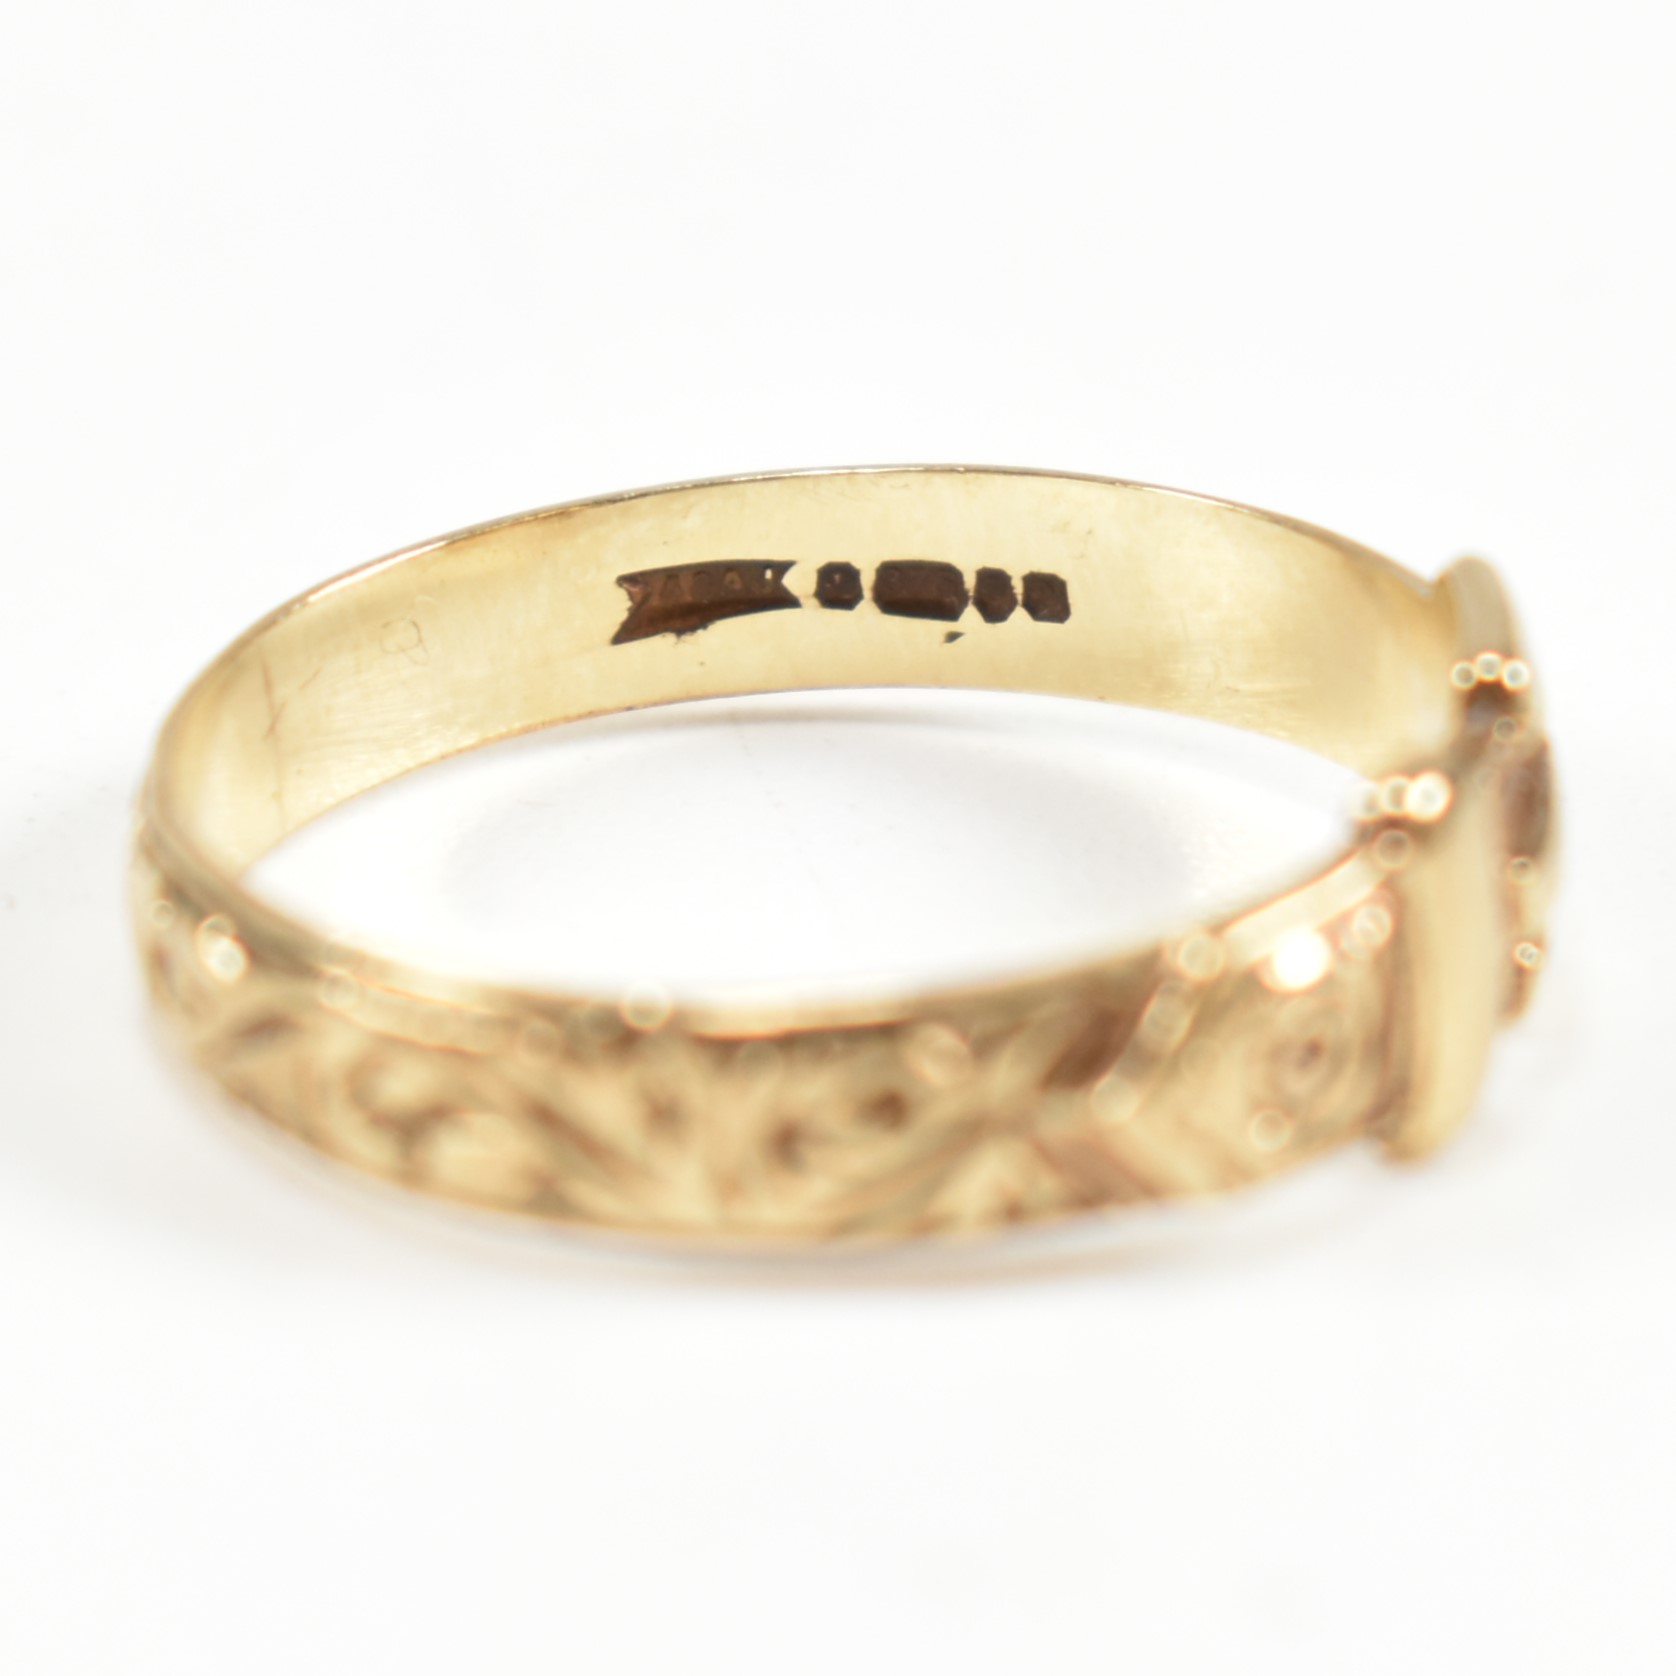 COLLECTION OF 9CT GOLD JEWELLERY INCLUDING GOLD & SILVER ETERNITY RING - Image 12 of 13